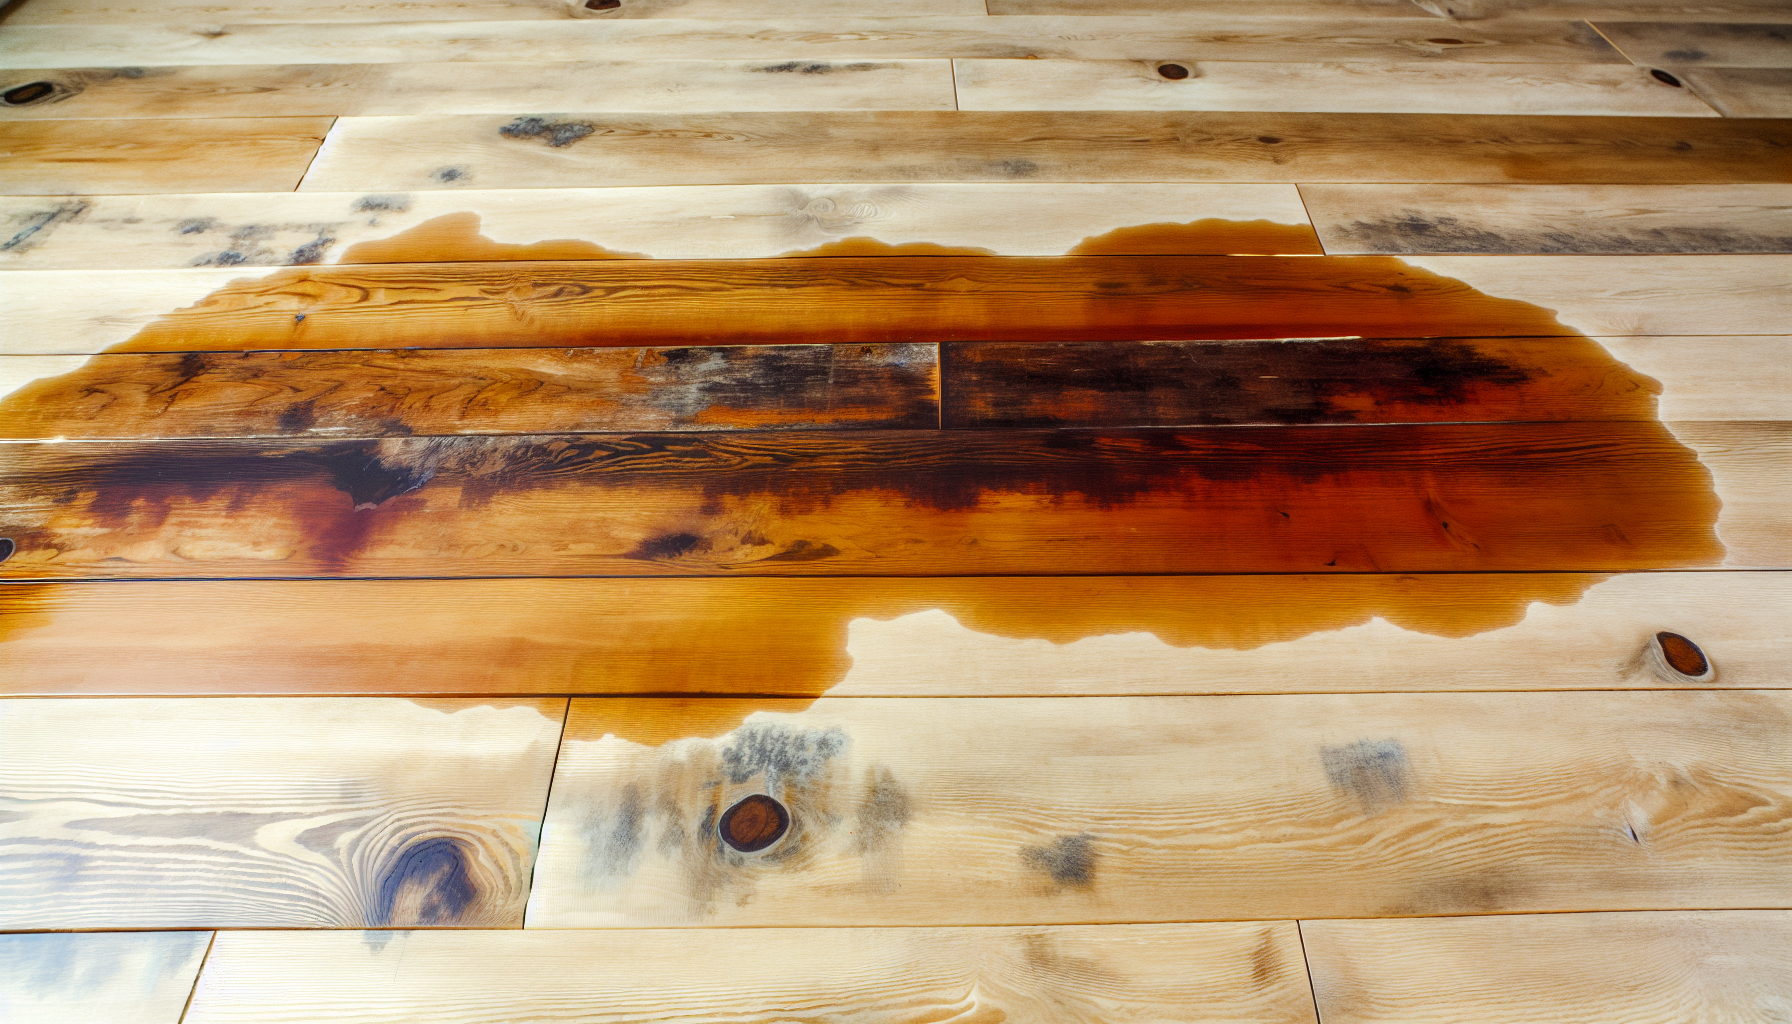 Water damaged hardwood floor with visible stains and discoloration